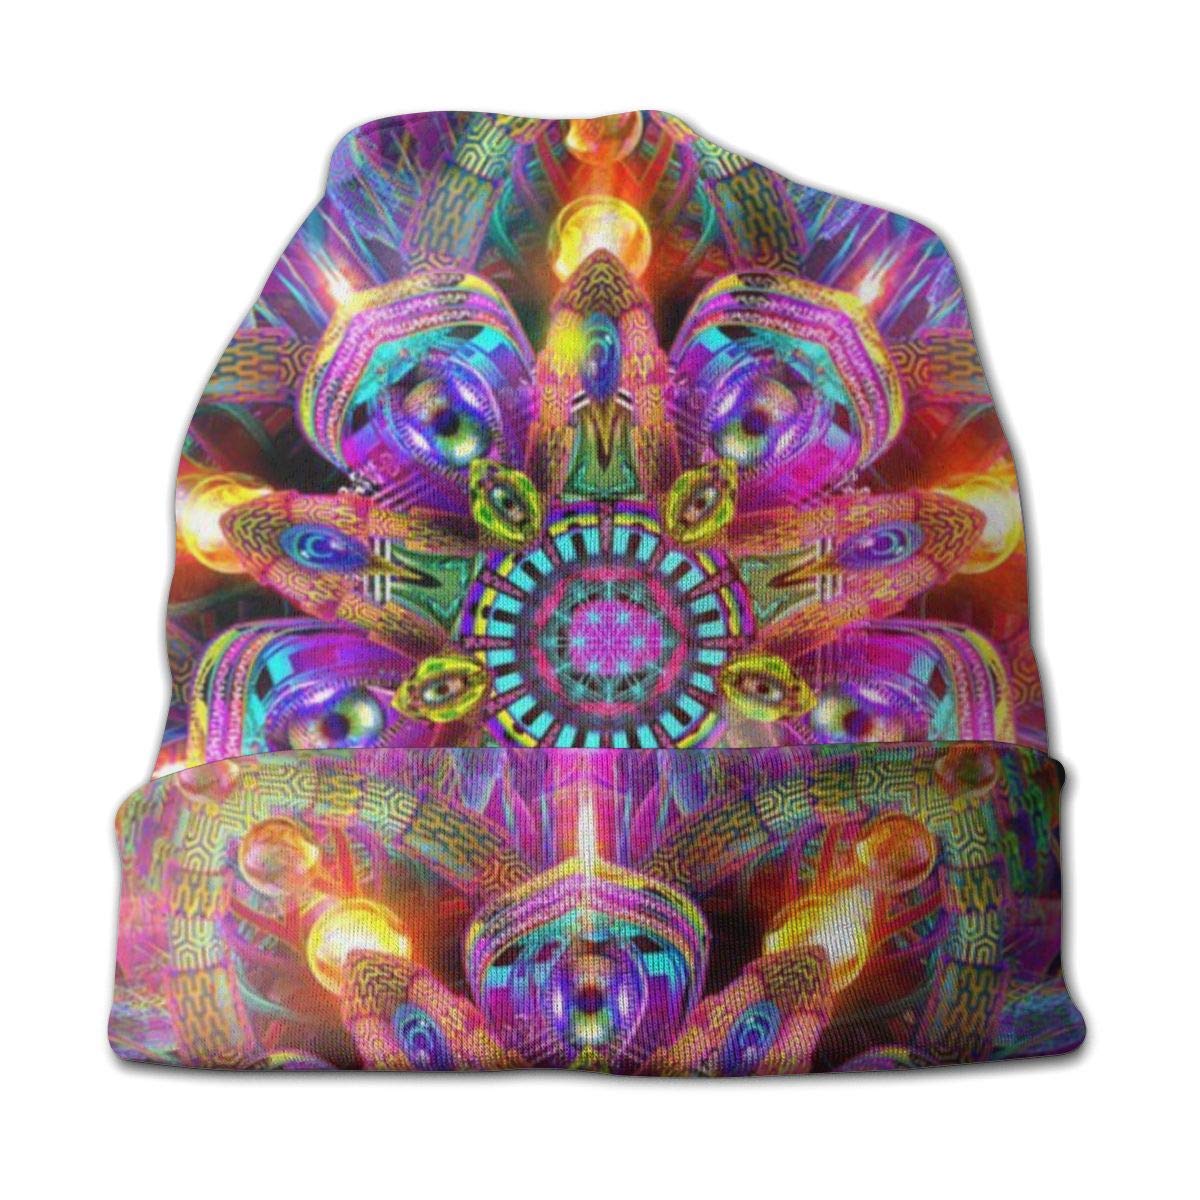 Unisex Beanie Caps 3D Cool Kaleidoscope Psychedelic Trippy Colorful Slouchy Cuff Skull Knit Hat Cap Winter Summer Warm Ski Hats Snapback Black